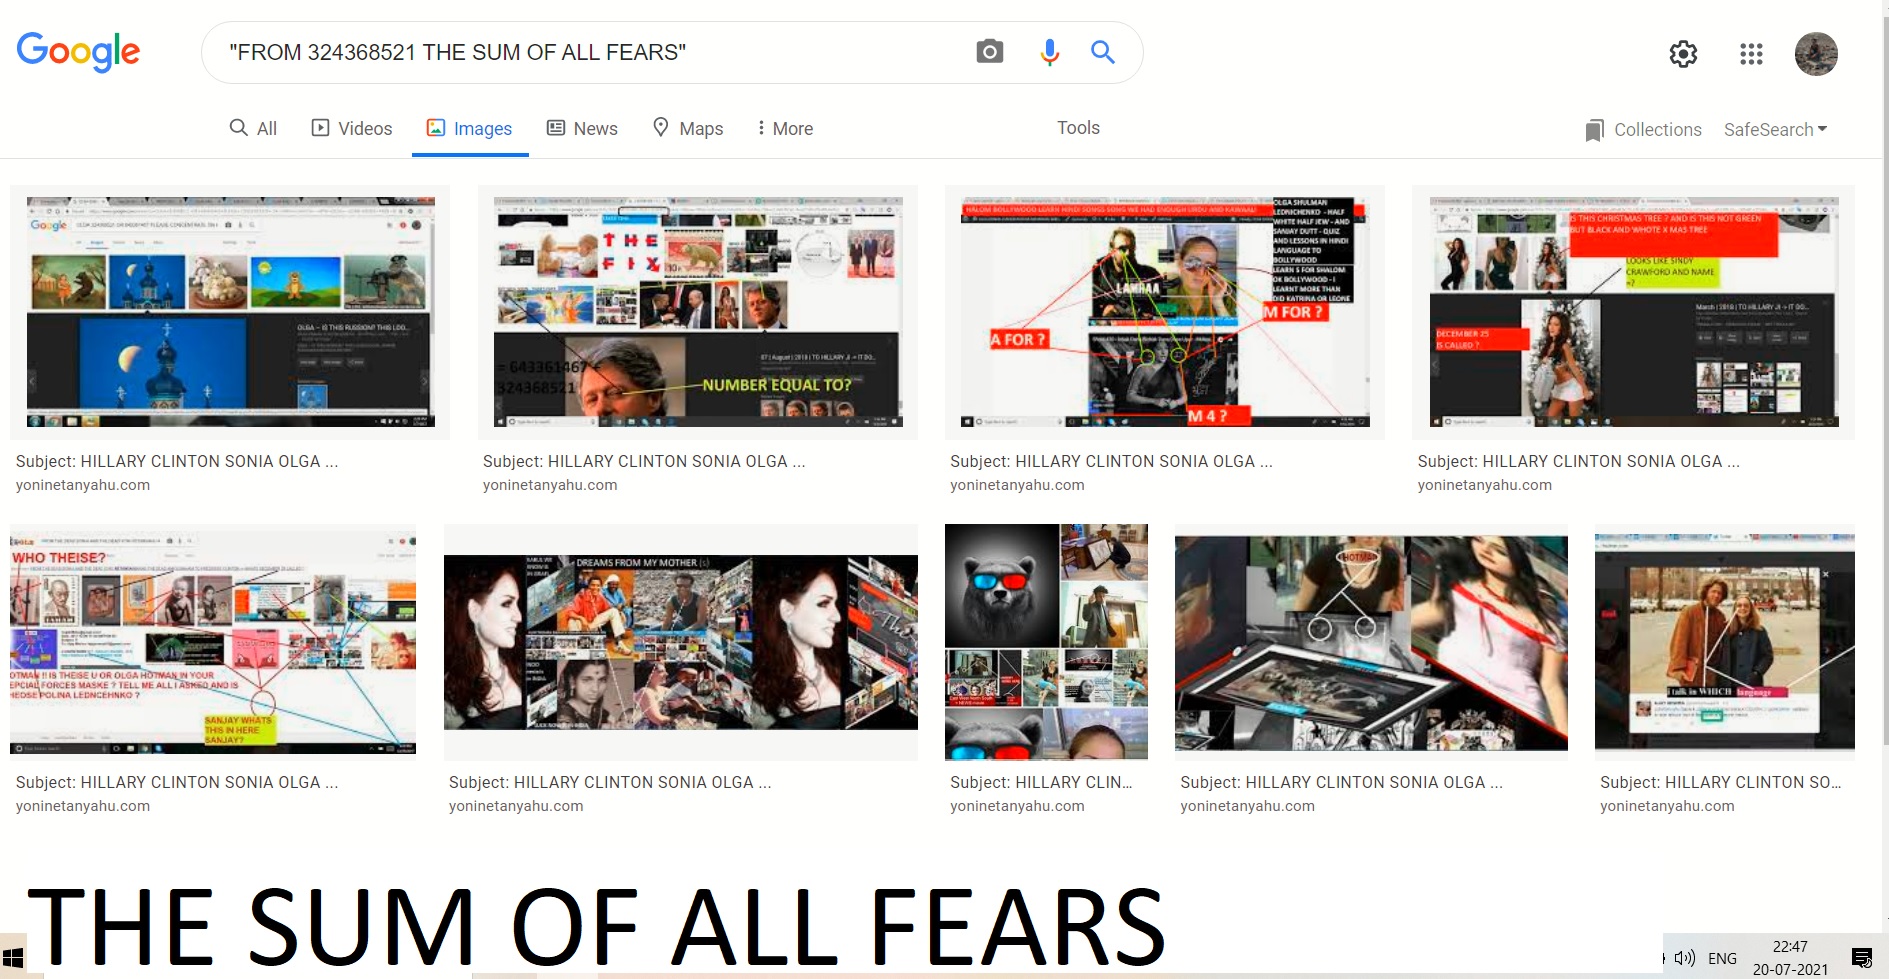 THE SUM OF ALL FEARS